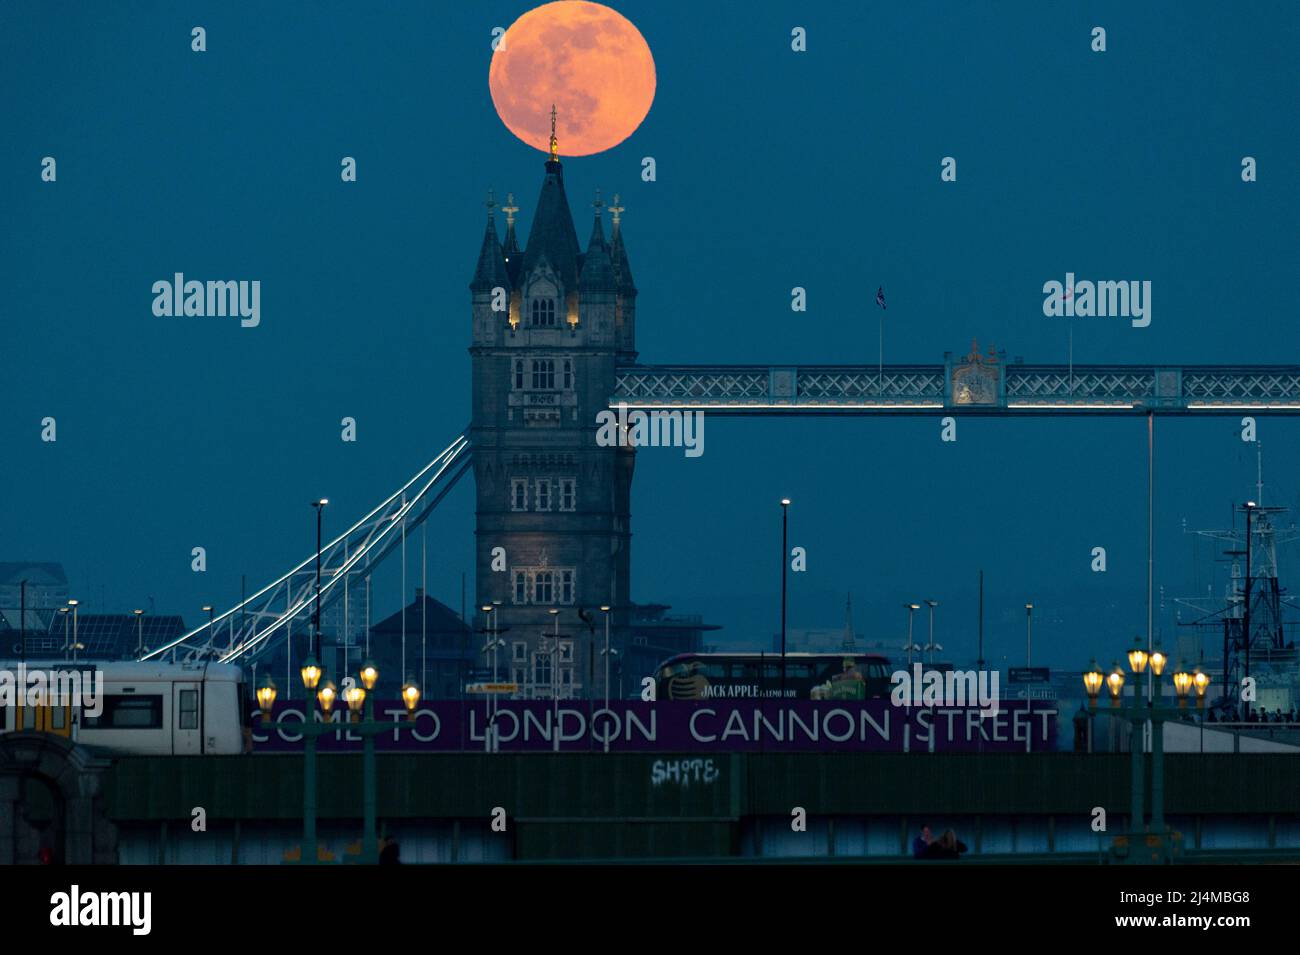 London, UK.  16 April 2022.  UK Weather – April’s full moon, known as a Pink Moon, rises behind Tower Bridge.  According to the Old Farmer’s Almanac, the name Pink Moon comes from the full moon coinciding with early springtime pink blooms of the Phlox subulata, a North American wildflower.  April’s full moon is also the Paschal full moon (the first full Moon of spring) with Easter celebrated on the first Sunday after the Paschal full moon, this year on Sunday, April 17.  Credit: Stephen Chung / Alamy Live News Stock Photo